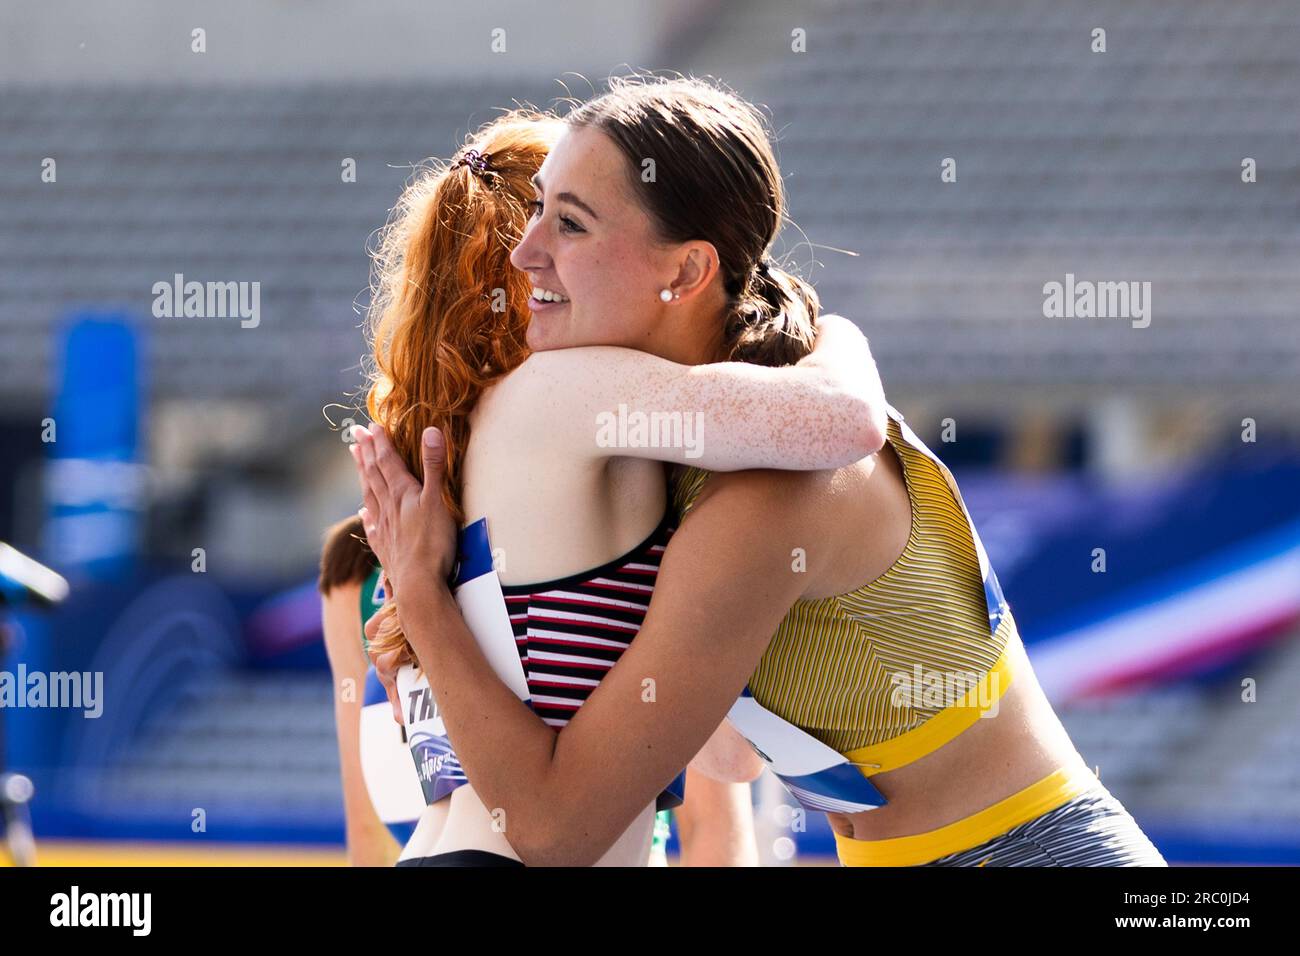 Paris, 10.07.23: Nele Moos (R) of germany after 100m Sprint (Klasse T 38) during the para athletic world championships 2023. Stock Photo